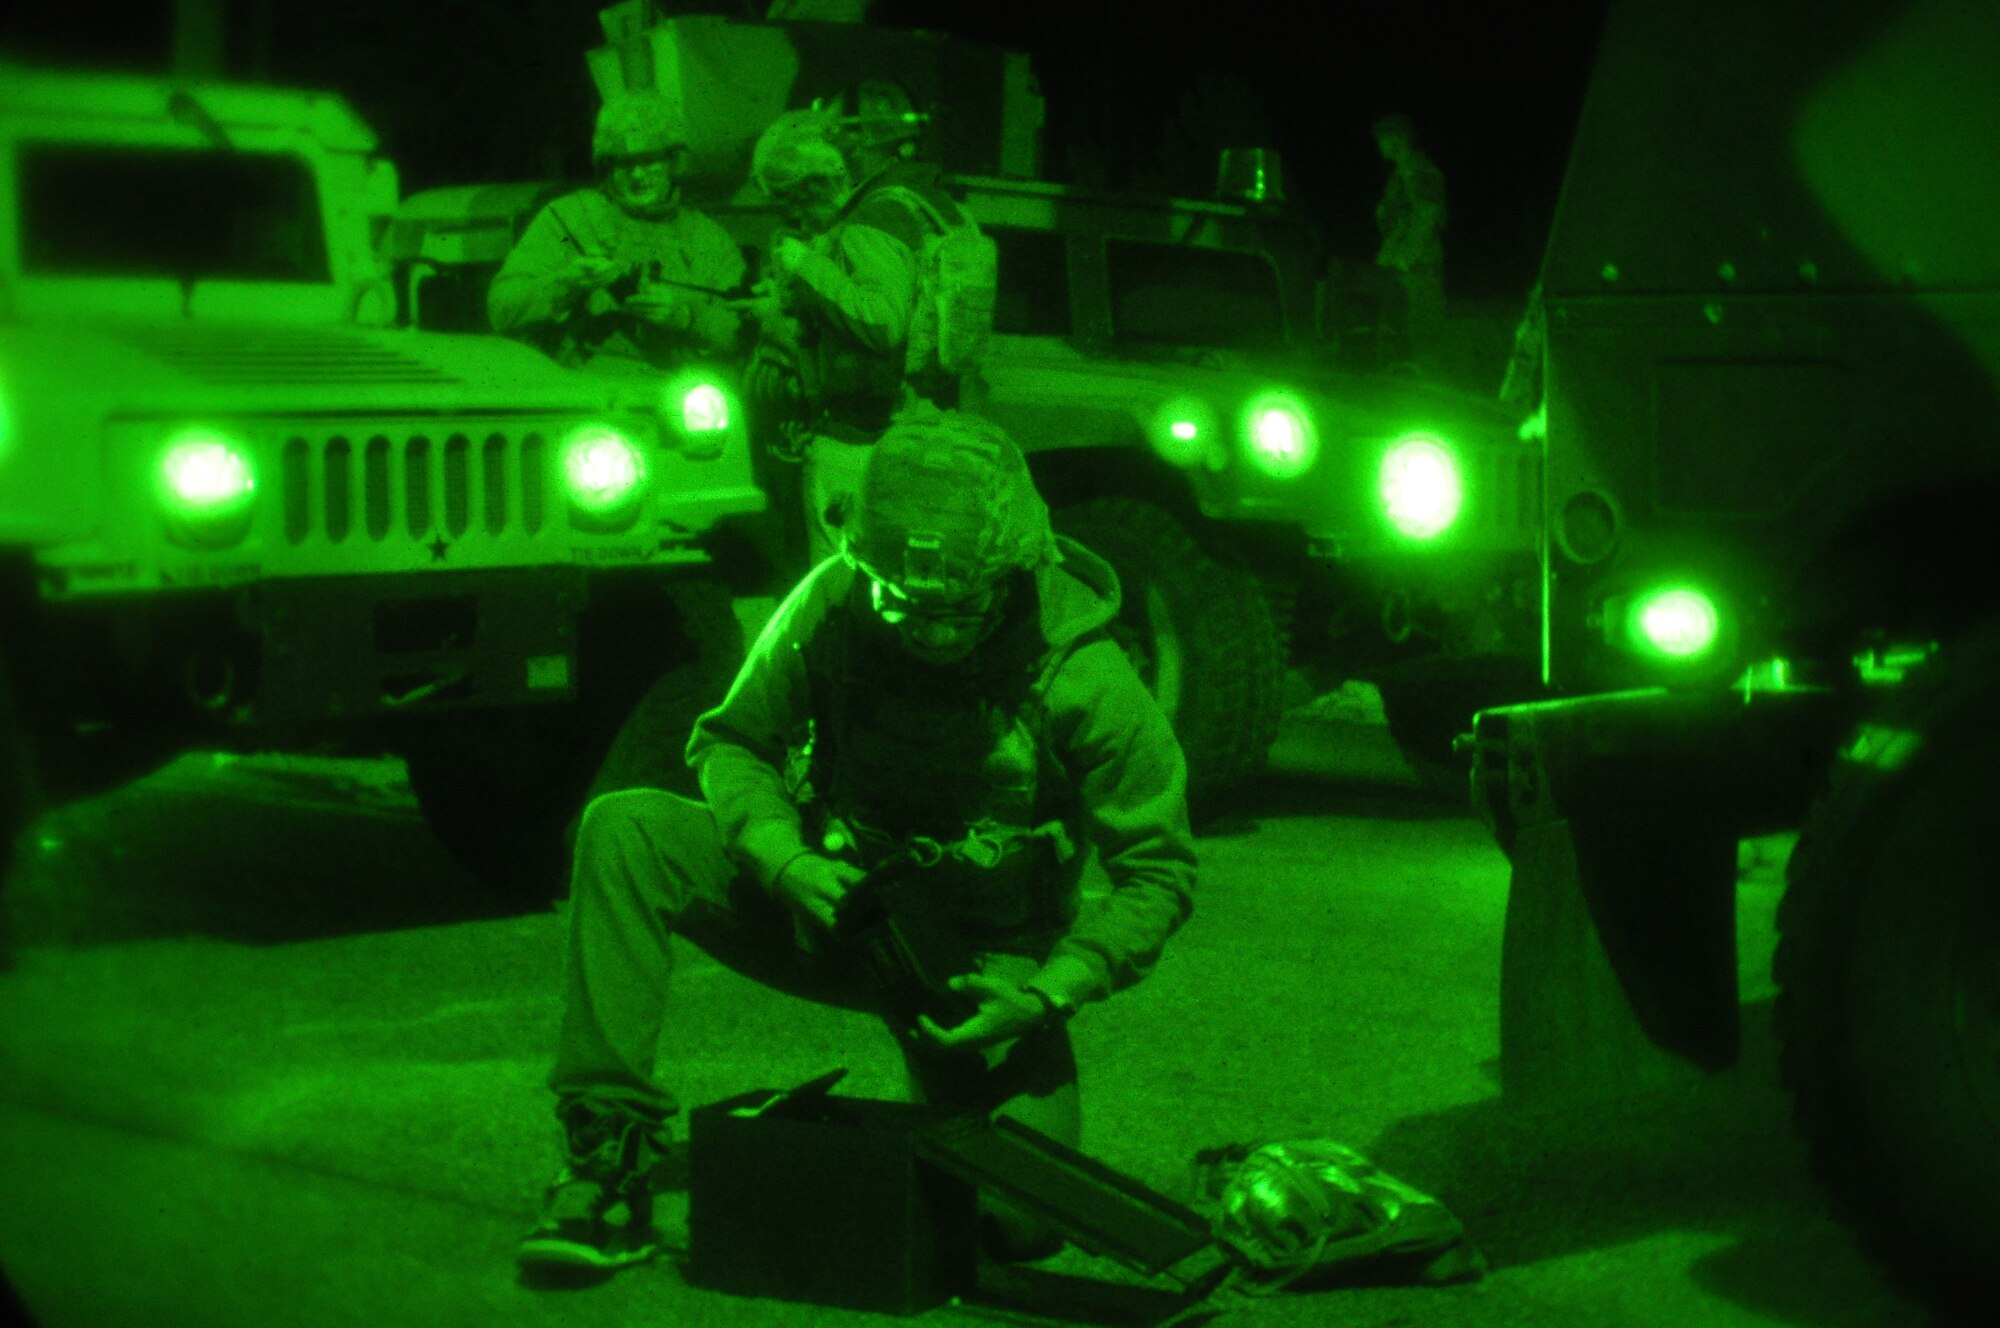 A 341st Security Forces Group Airman prepares for a mission at Malmstrom Air Force Base, Mont., during exercise GLOBAL THUNDER 16, Nov. 5, 2015. The 341st SFG is part of U.S. Strategic Command’s (USSTRATCOM) Task Force 214 and supports the command’s strategic deterrence mission by operating and maintaining the Air Force’s Intercontinental Ballistic Missile force. GLOBAL THUNDER is an annual U.S. Strategic Command training event that assesses command and control functionality in all USSTRATCOM mission areas and affords component commands a venue to evaluate their joint operational readiness. Planning for GLOBAL THUNDER 16 has been under way for more than a year and is based on a notional scenario with fictitious adversaries. USSTRATCOM, one of nine DoD unified combatant commands, relies on various task forces for the execution of its global missions, which also include space operations; cyberspace operations; joint electronic warfare; global strike; missile defense; intelligence, surveillance and reconnaissance; combating weapons of mass destruction; and analysis and targeting. (U.S. Air Force photo by Airman Collin 
Schmidt)